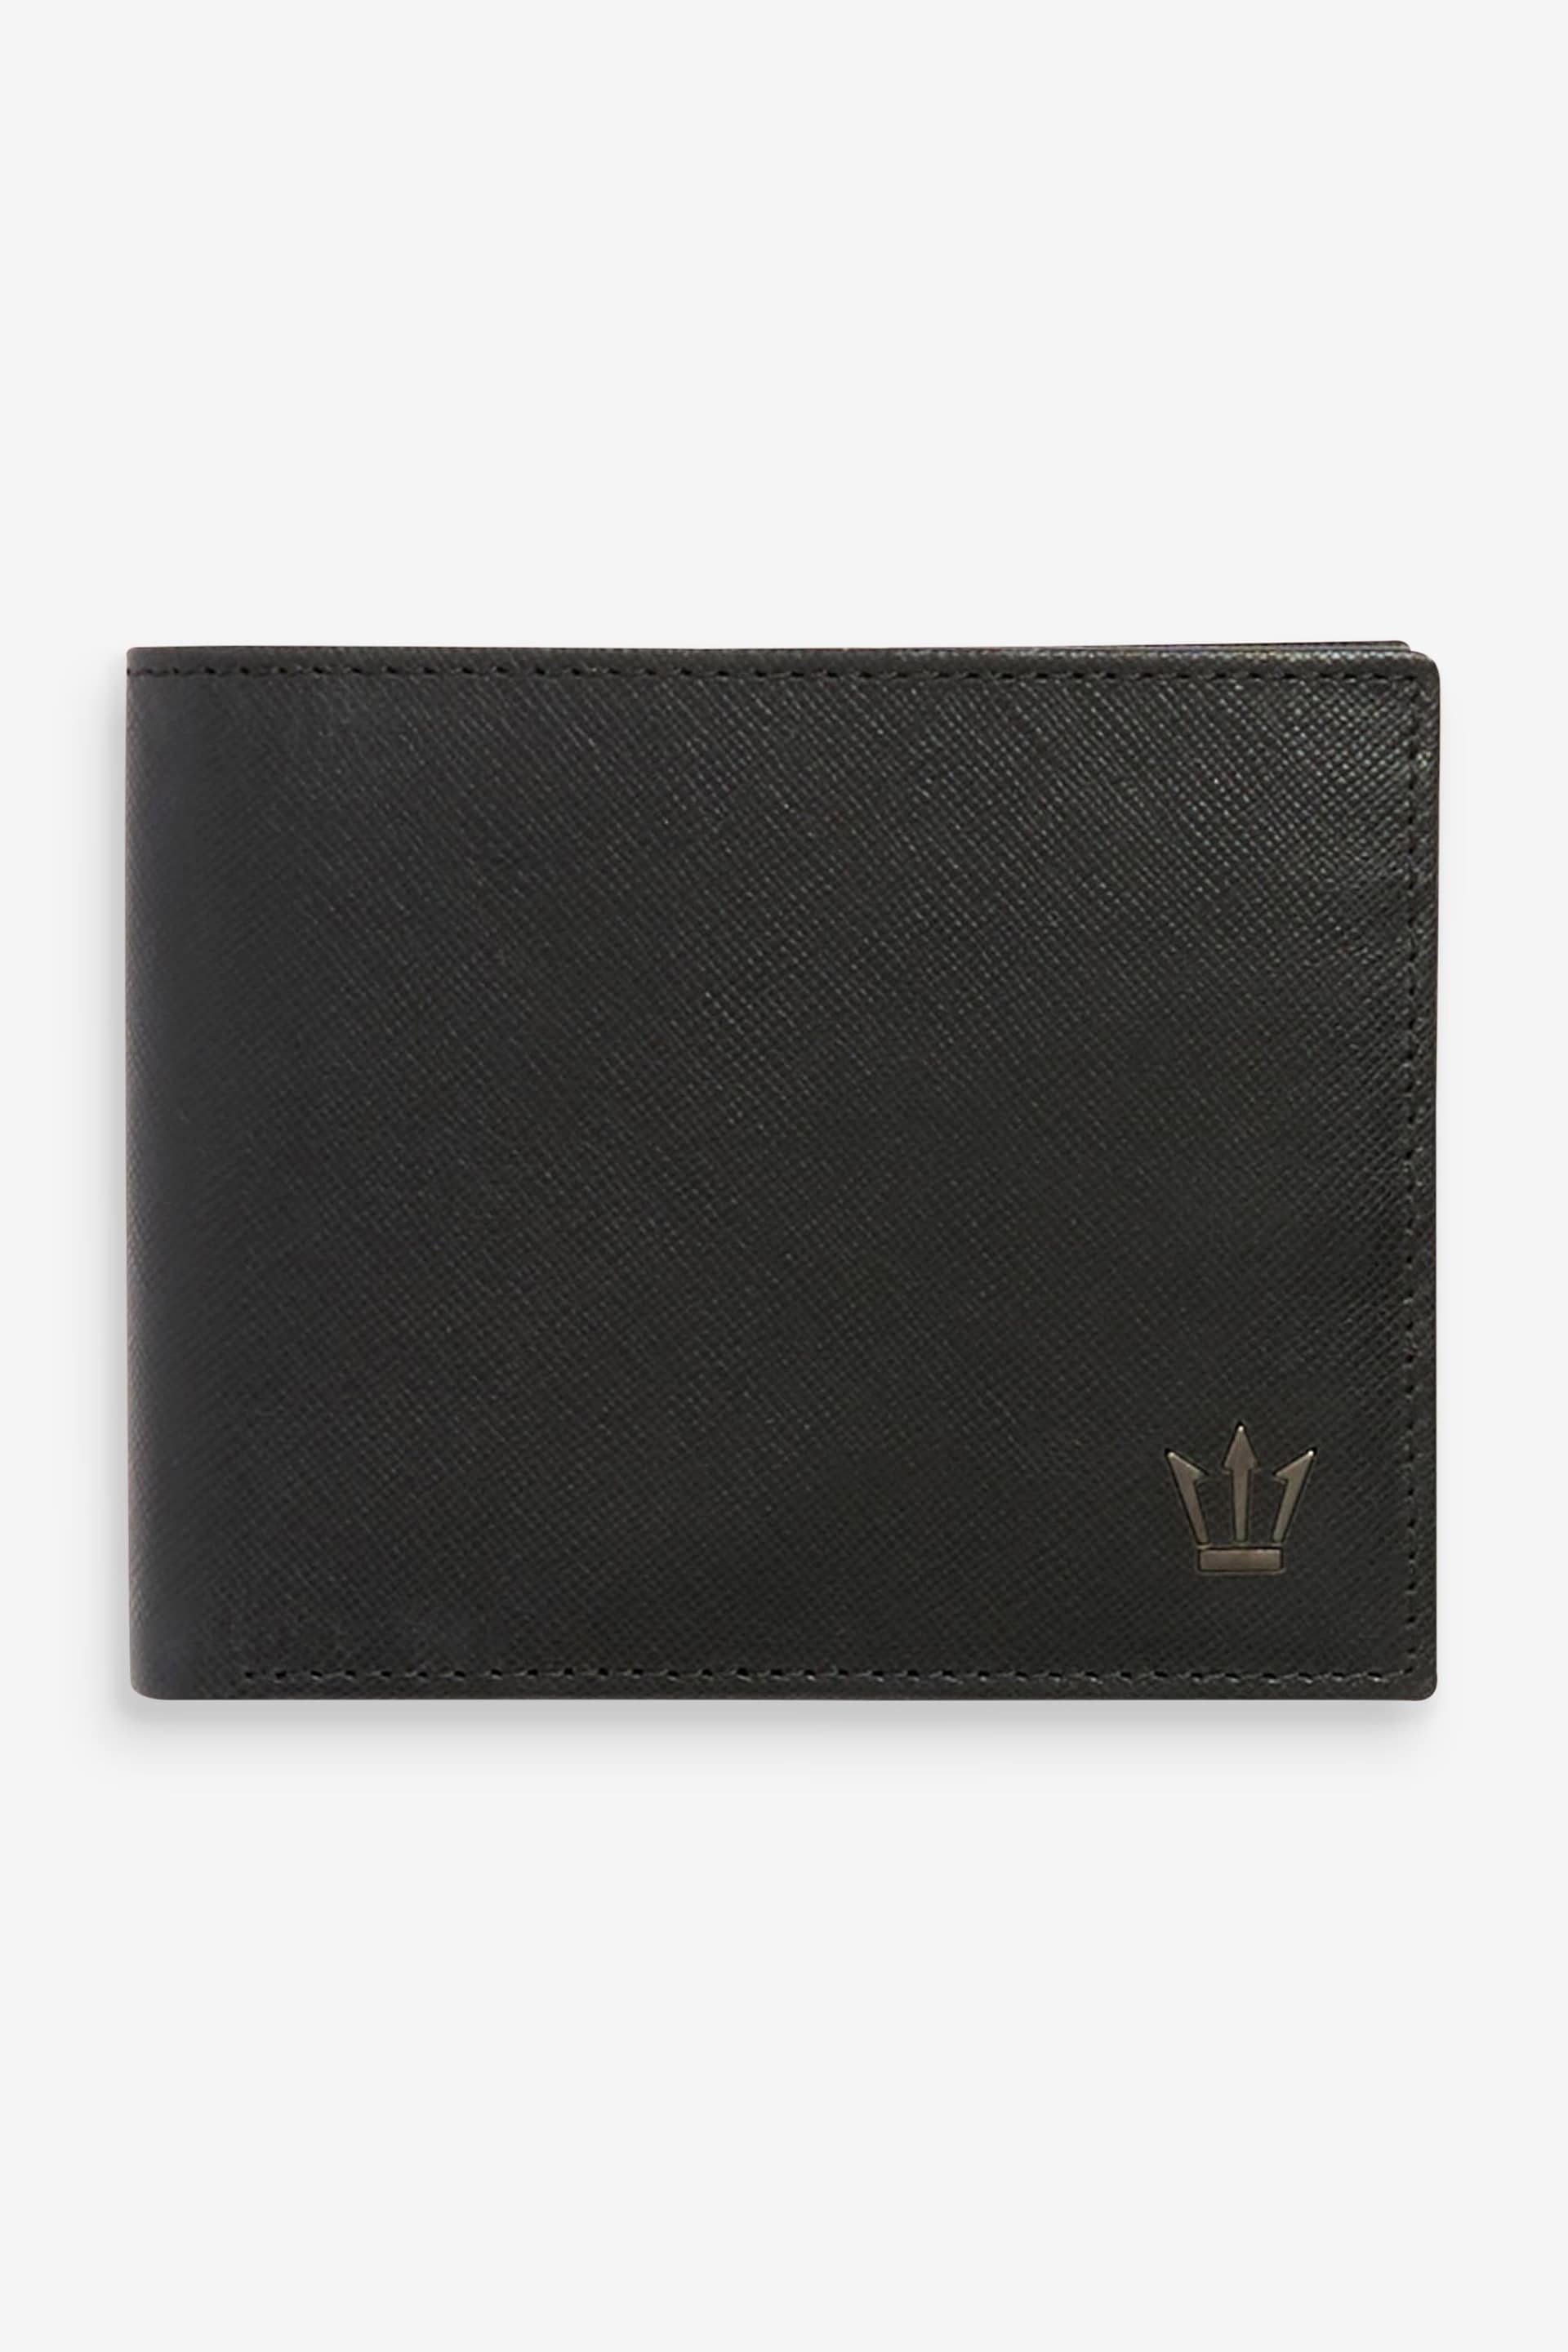 Black Signature Saffiano Leather Wallet - Image 1 of 3